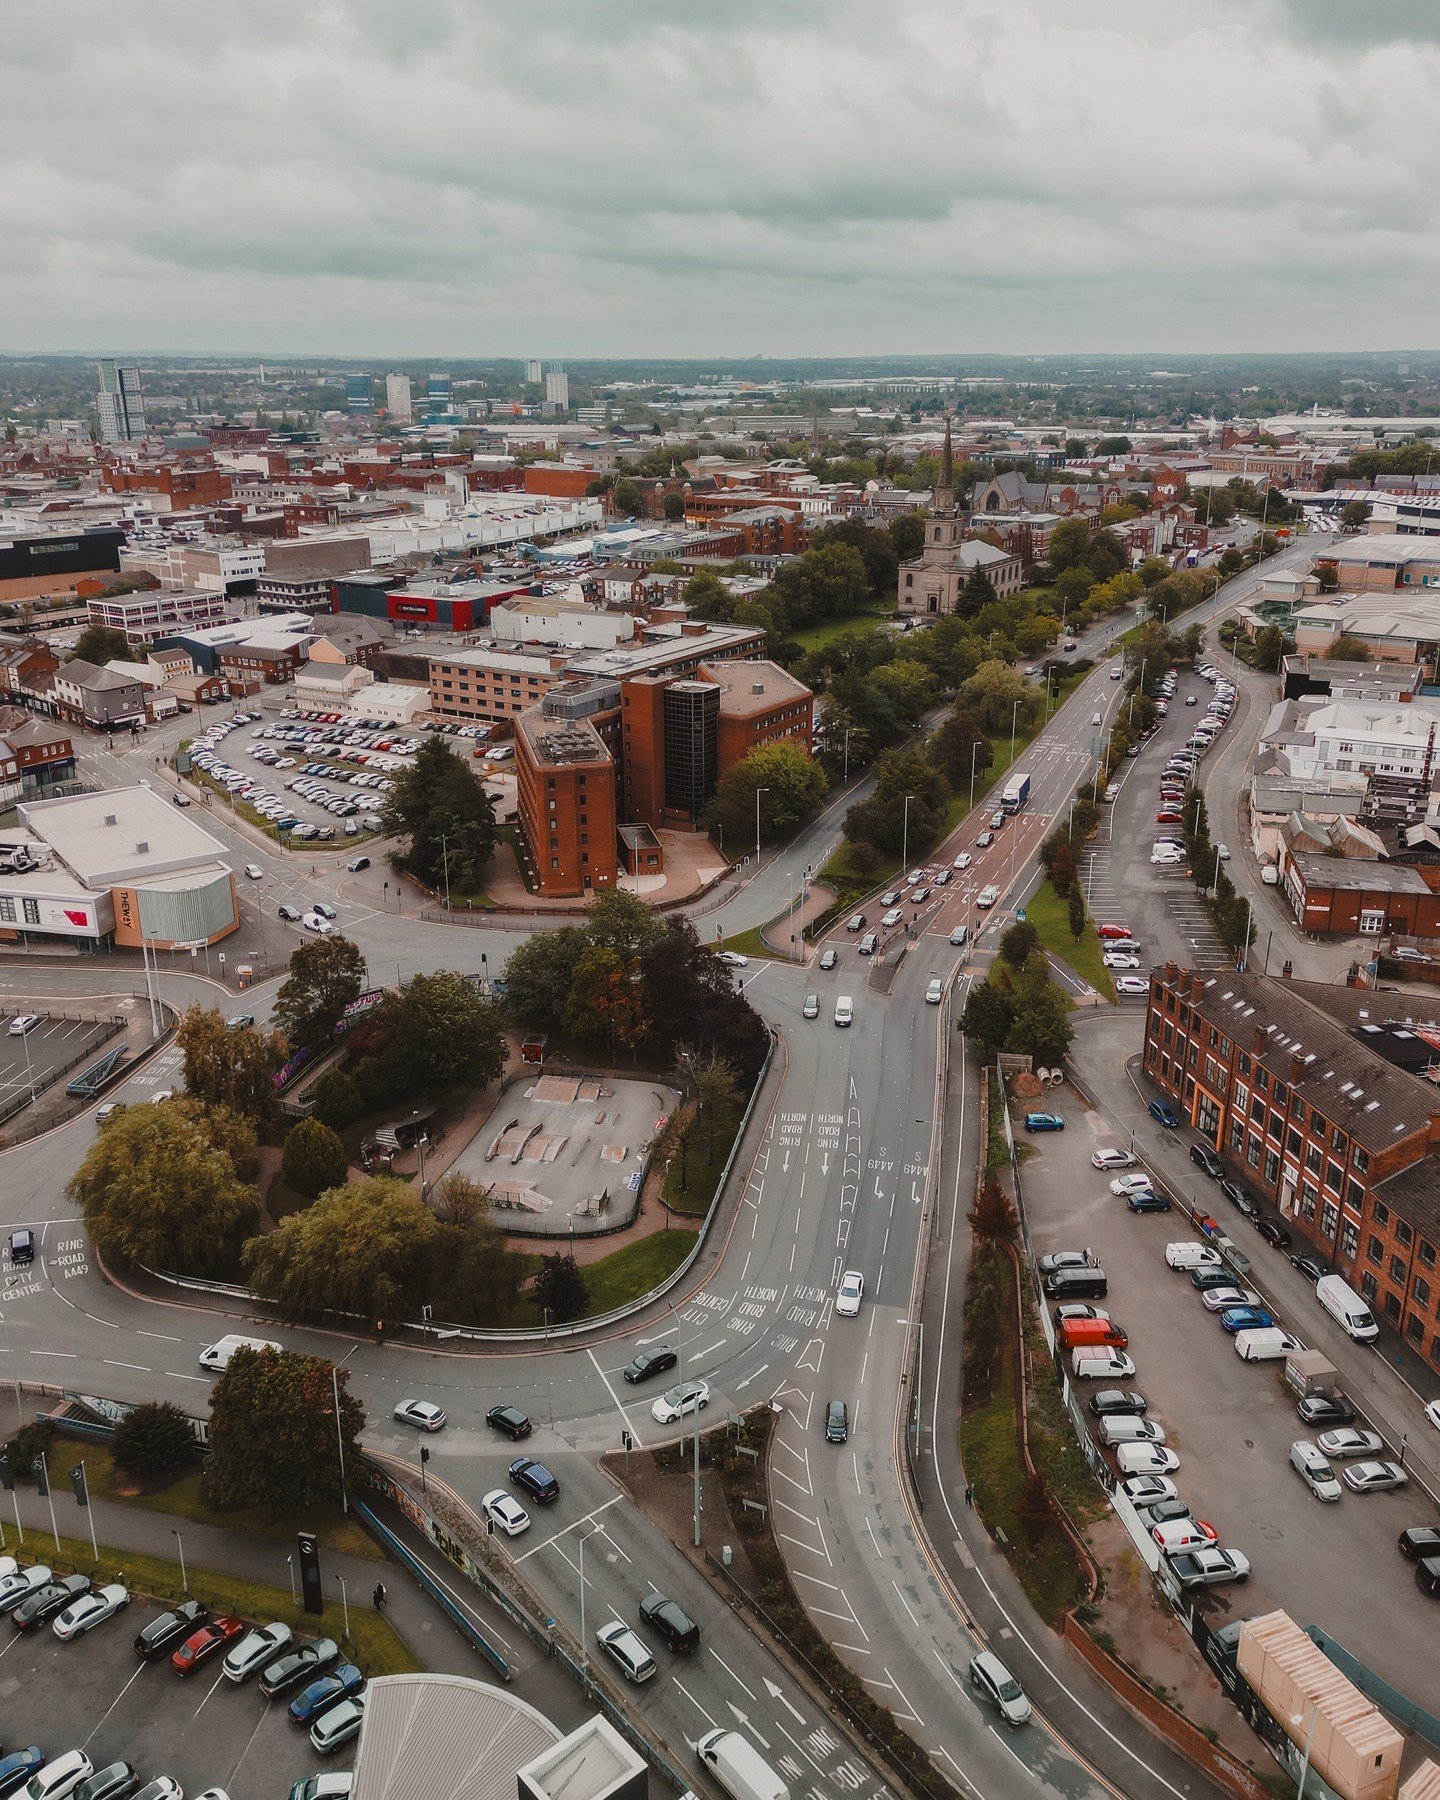 Why move to Wolverhampton?

🏡 Affordable Housing: Wolverhampton offers a lower living cost than other major UK cities, and property prices are relatively more affordable.
🚄 Transportation: The city has excellent public transportation links, includi